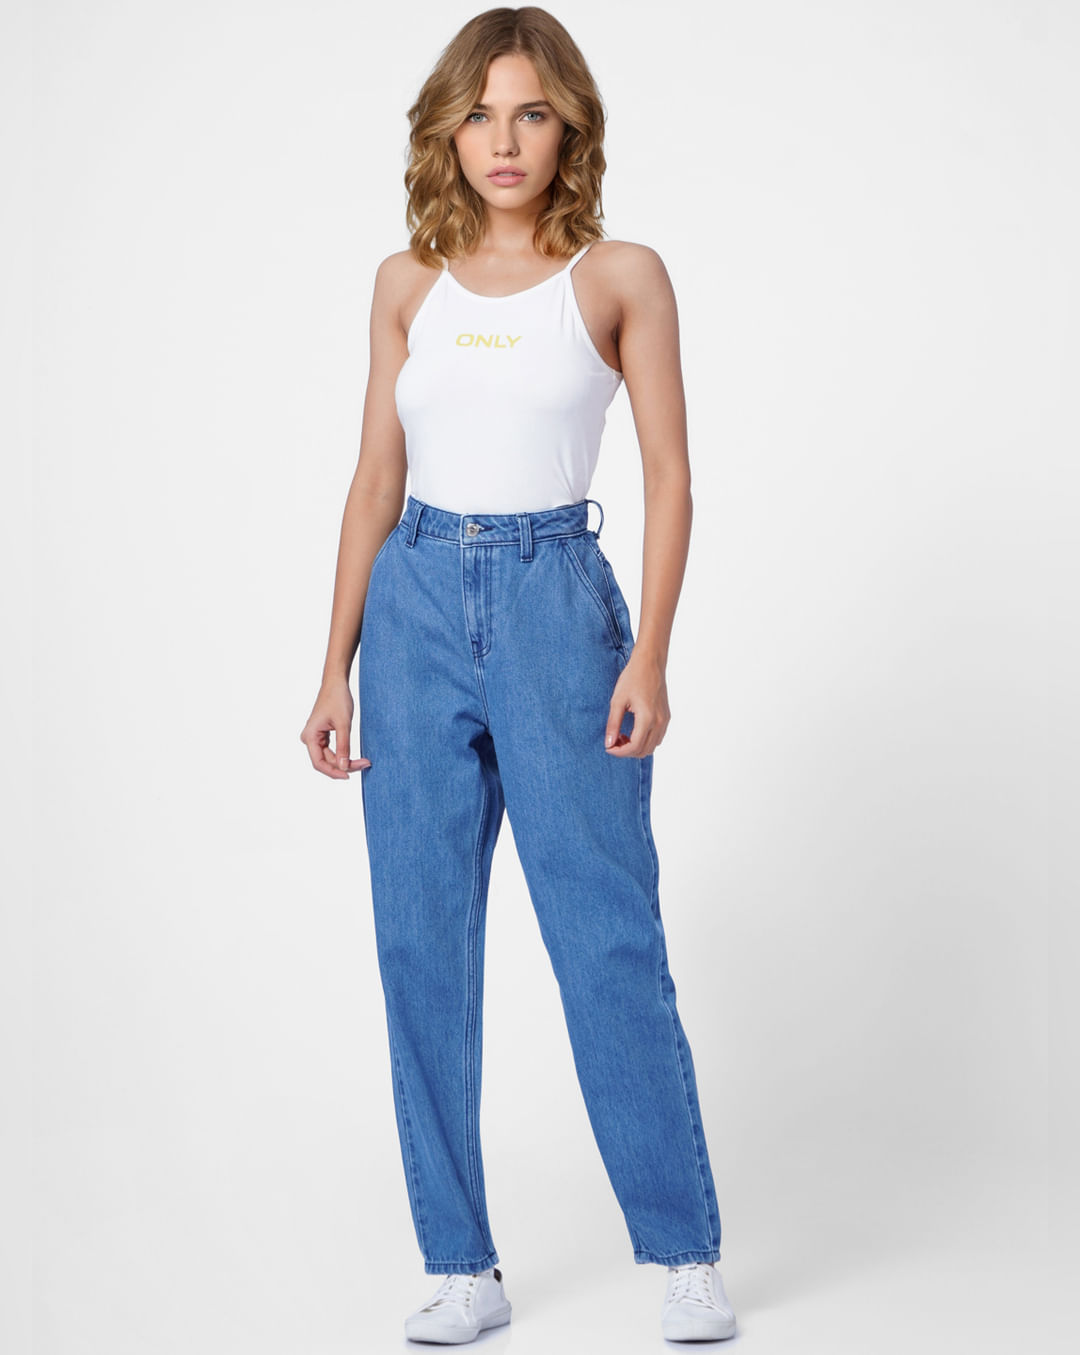 Buy Women Blue Floral Print Mom Jeans Online At Best Price